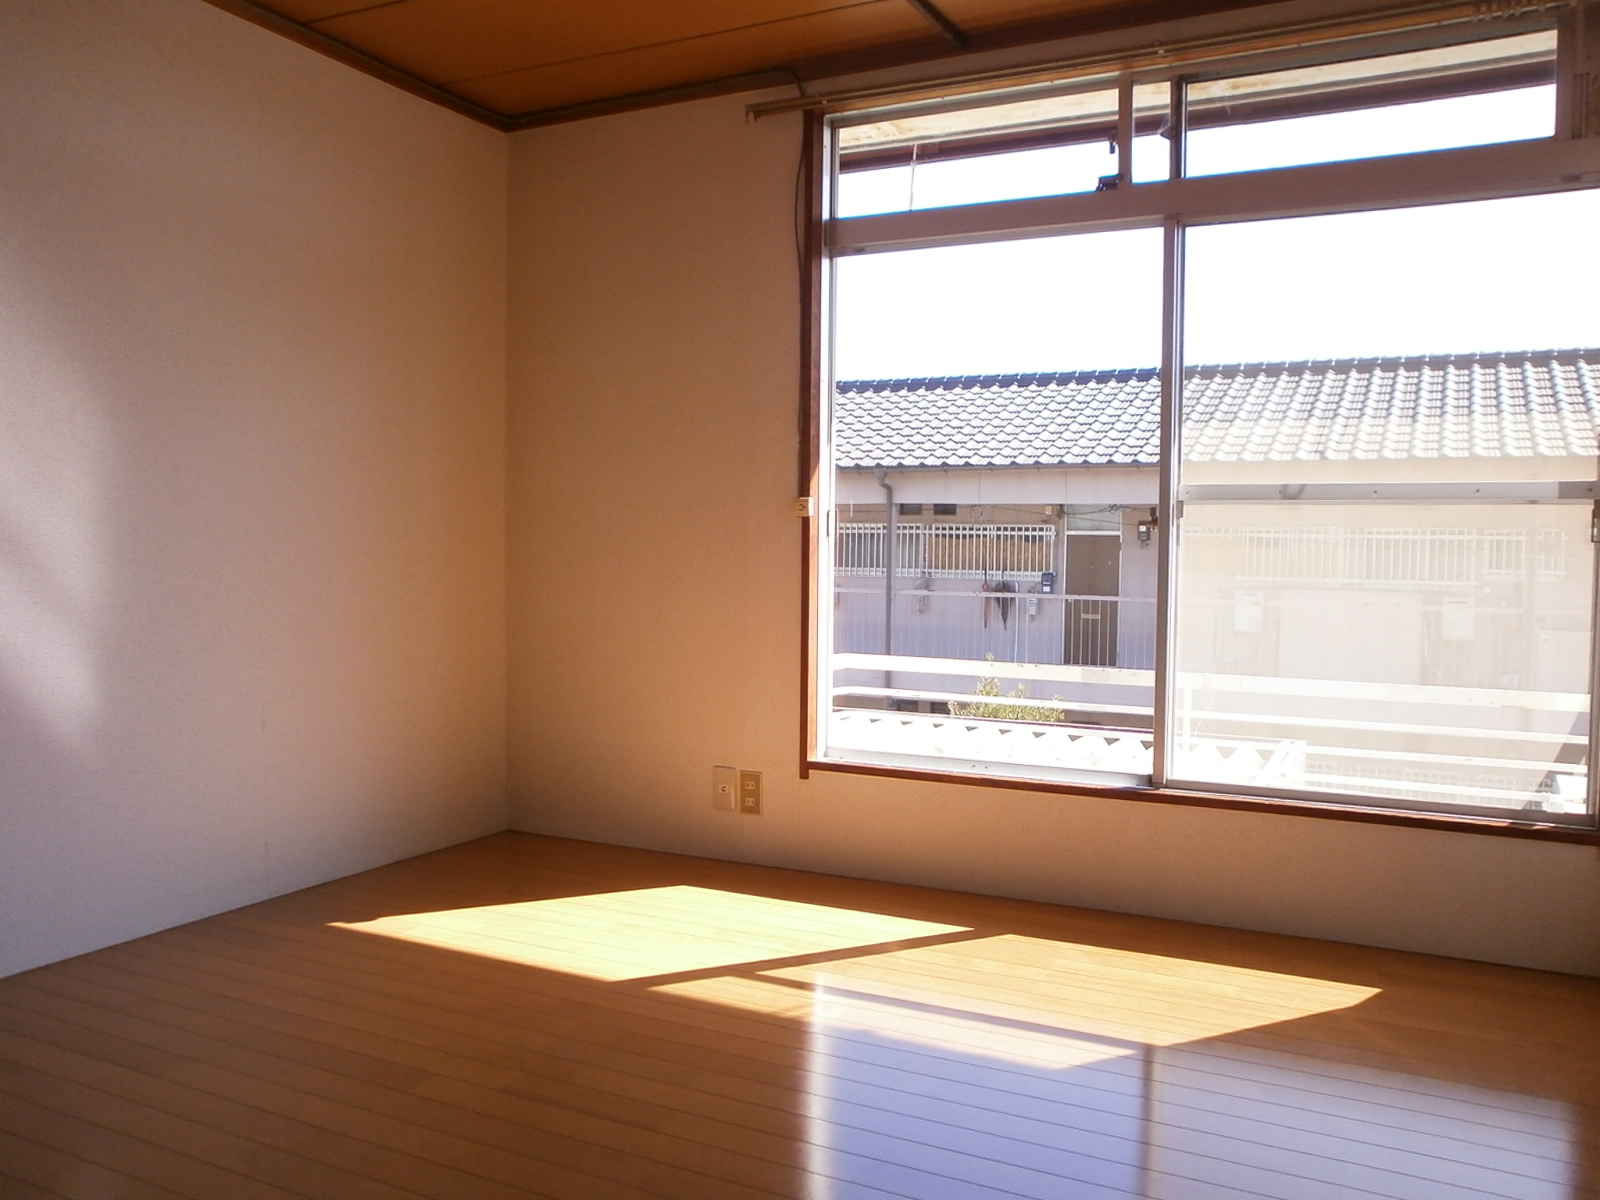 Living and room. It is well bright rooms per yang